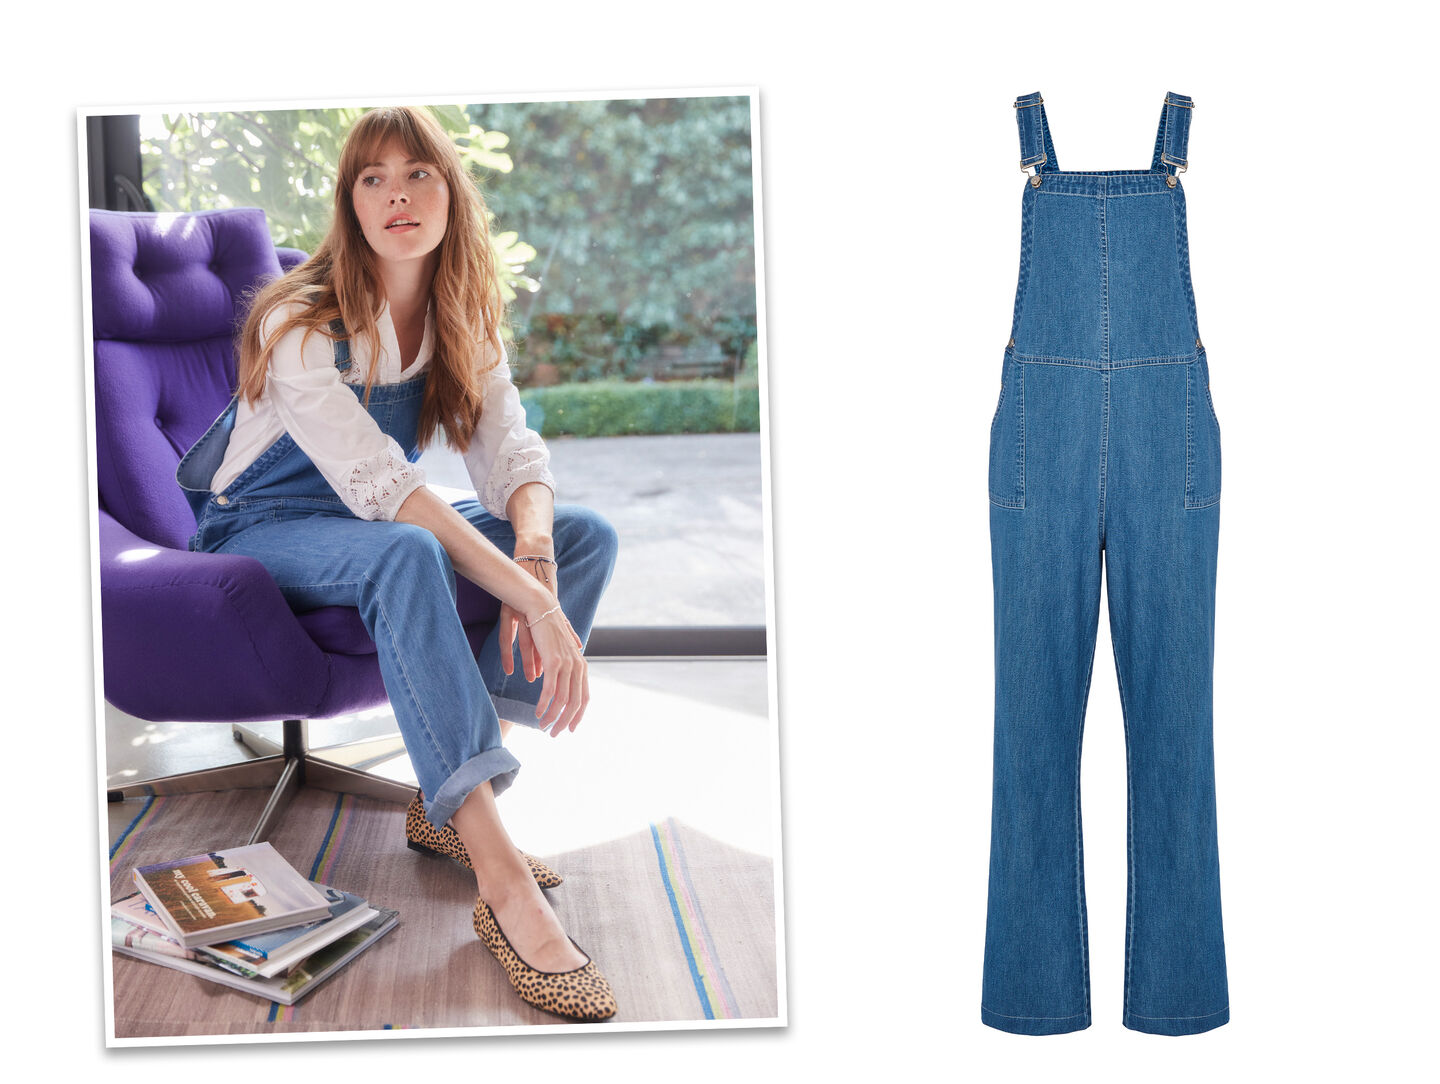 High/Low Women’s Fashion Denim Dungarees and Blouse